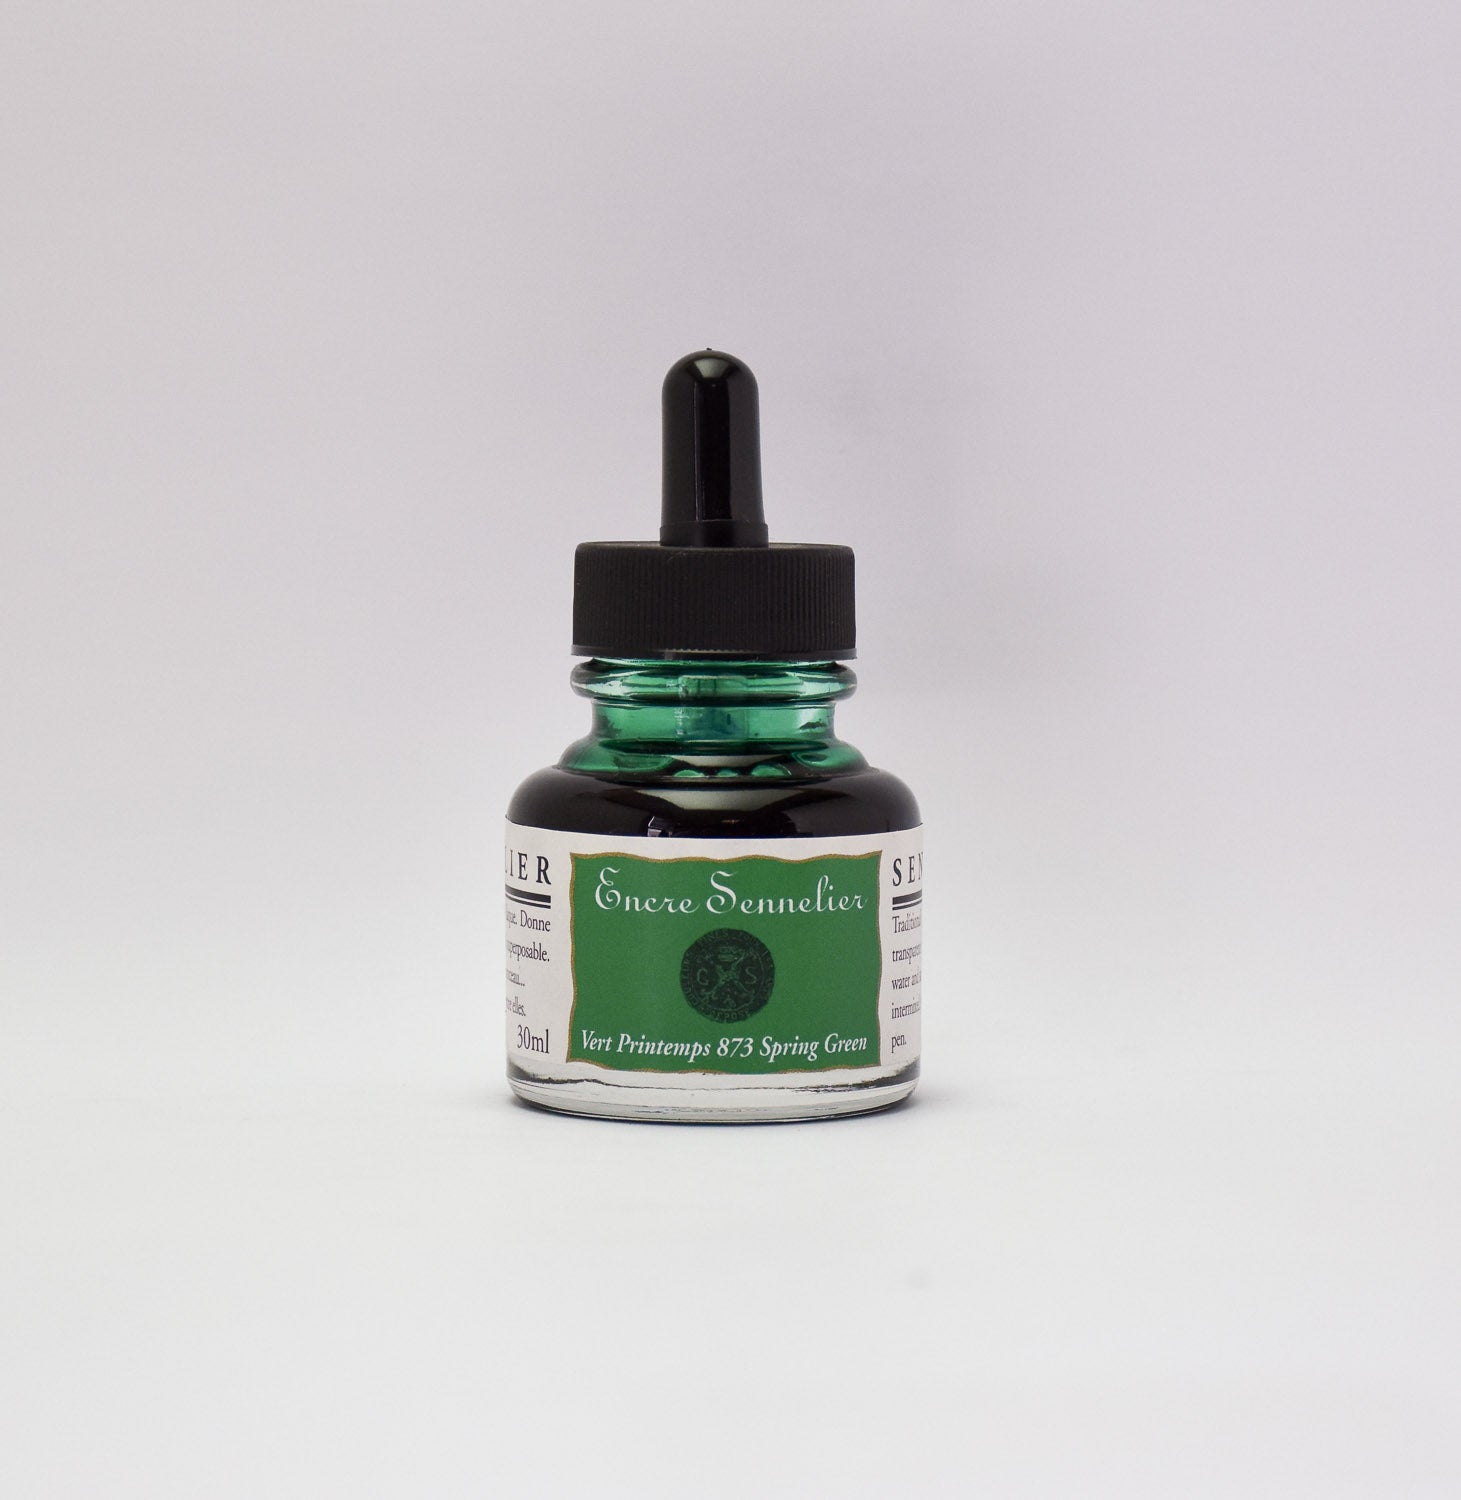 Sennelier Encre Drawing Ink 30ml - Melbourne Etching Supplies